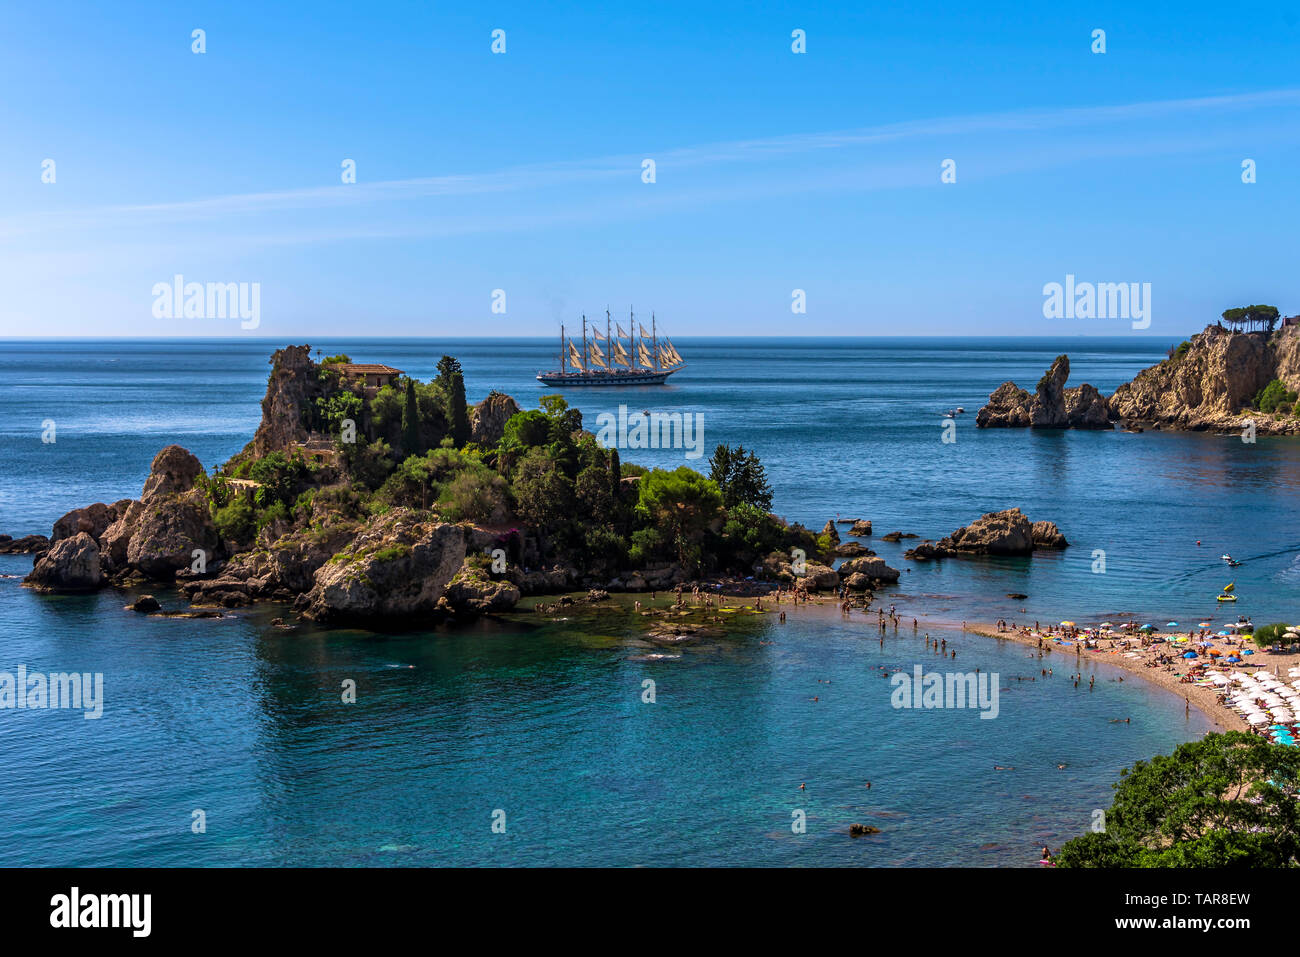 People enjoying the sun and the crystal clear water on the best beach in Sicily - Isola Bella, Taormina. Stock Photo